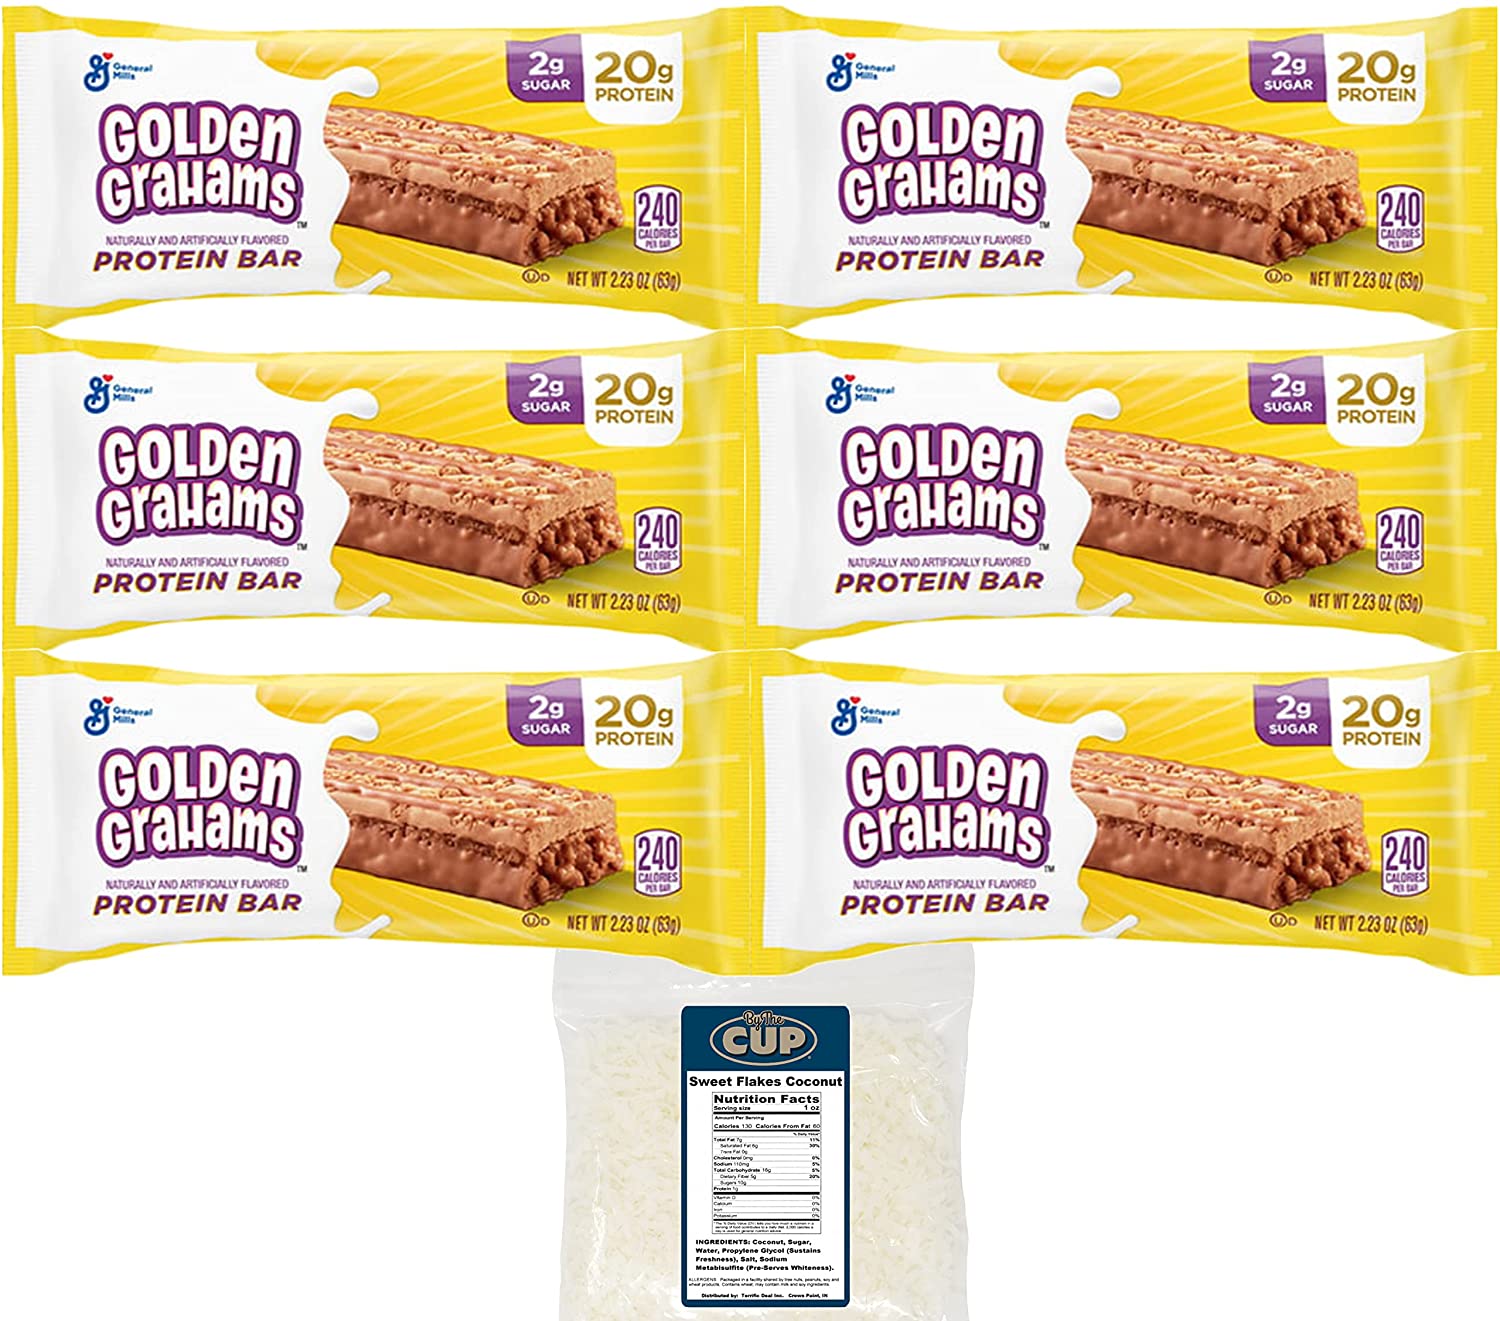 General Mills Golden Grahams Protein Bar (Pack of 6) with By The Cup Sweet Coconut Flakes